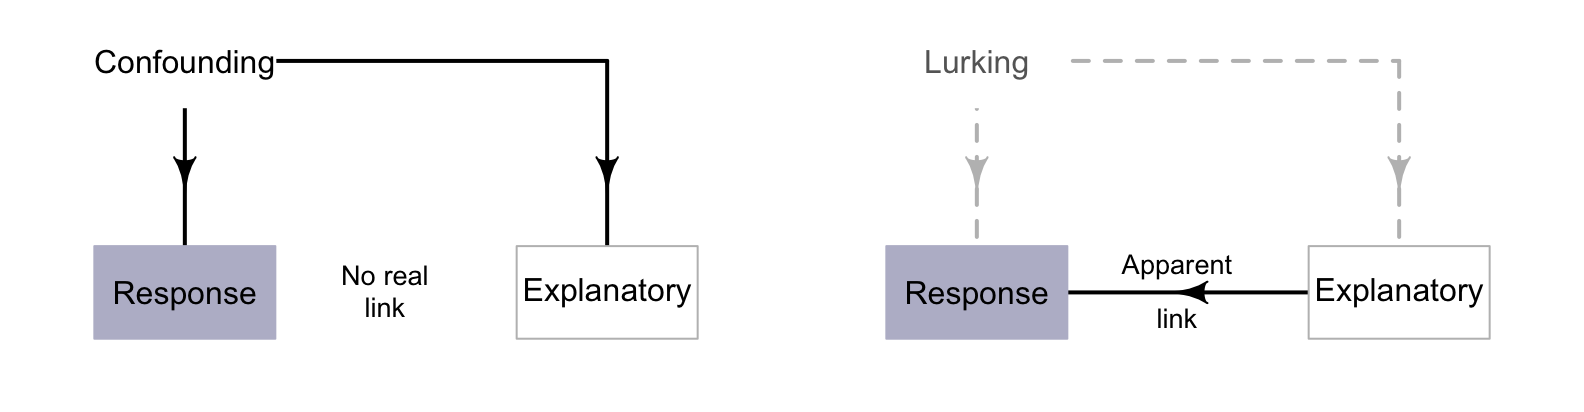 Confounding variables (left) are extraneous variables associated with the response and explanatory variables. Lurking variables (right) are associated with the response and explanatory variables, but are not recorded